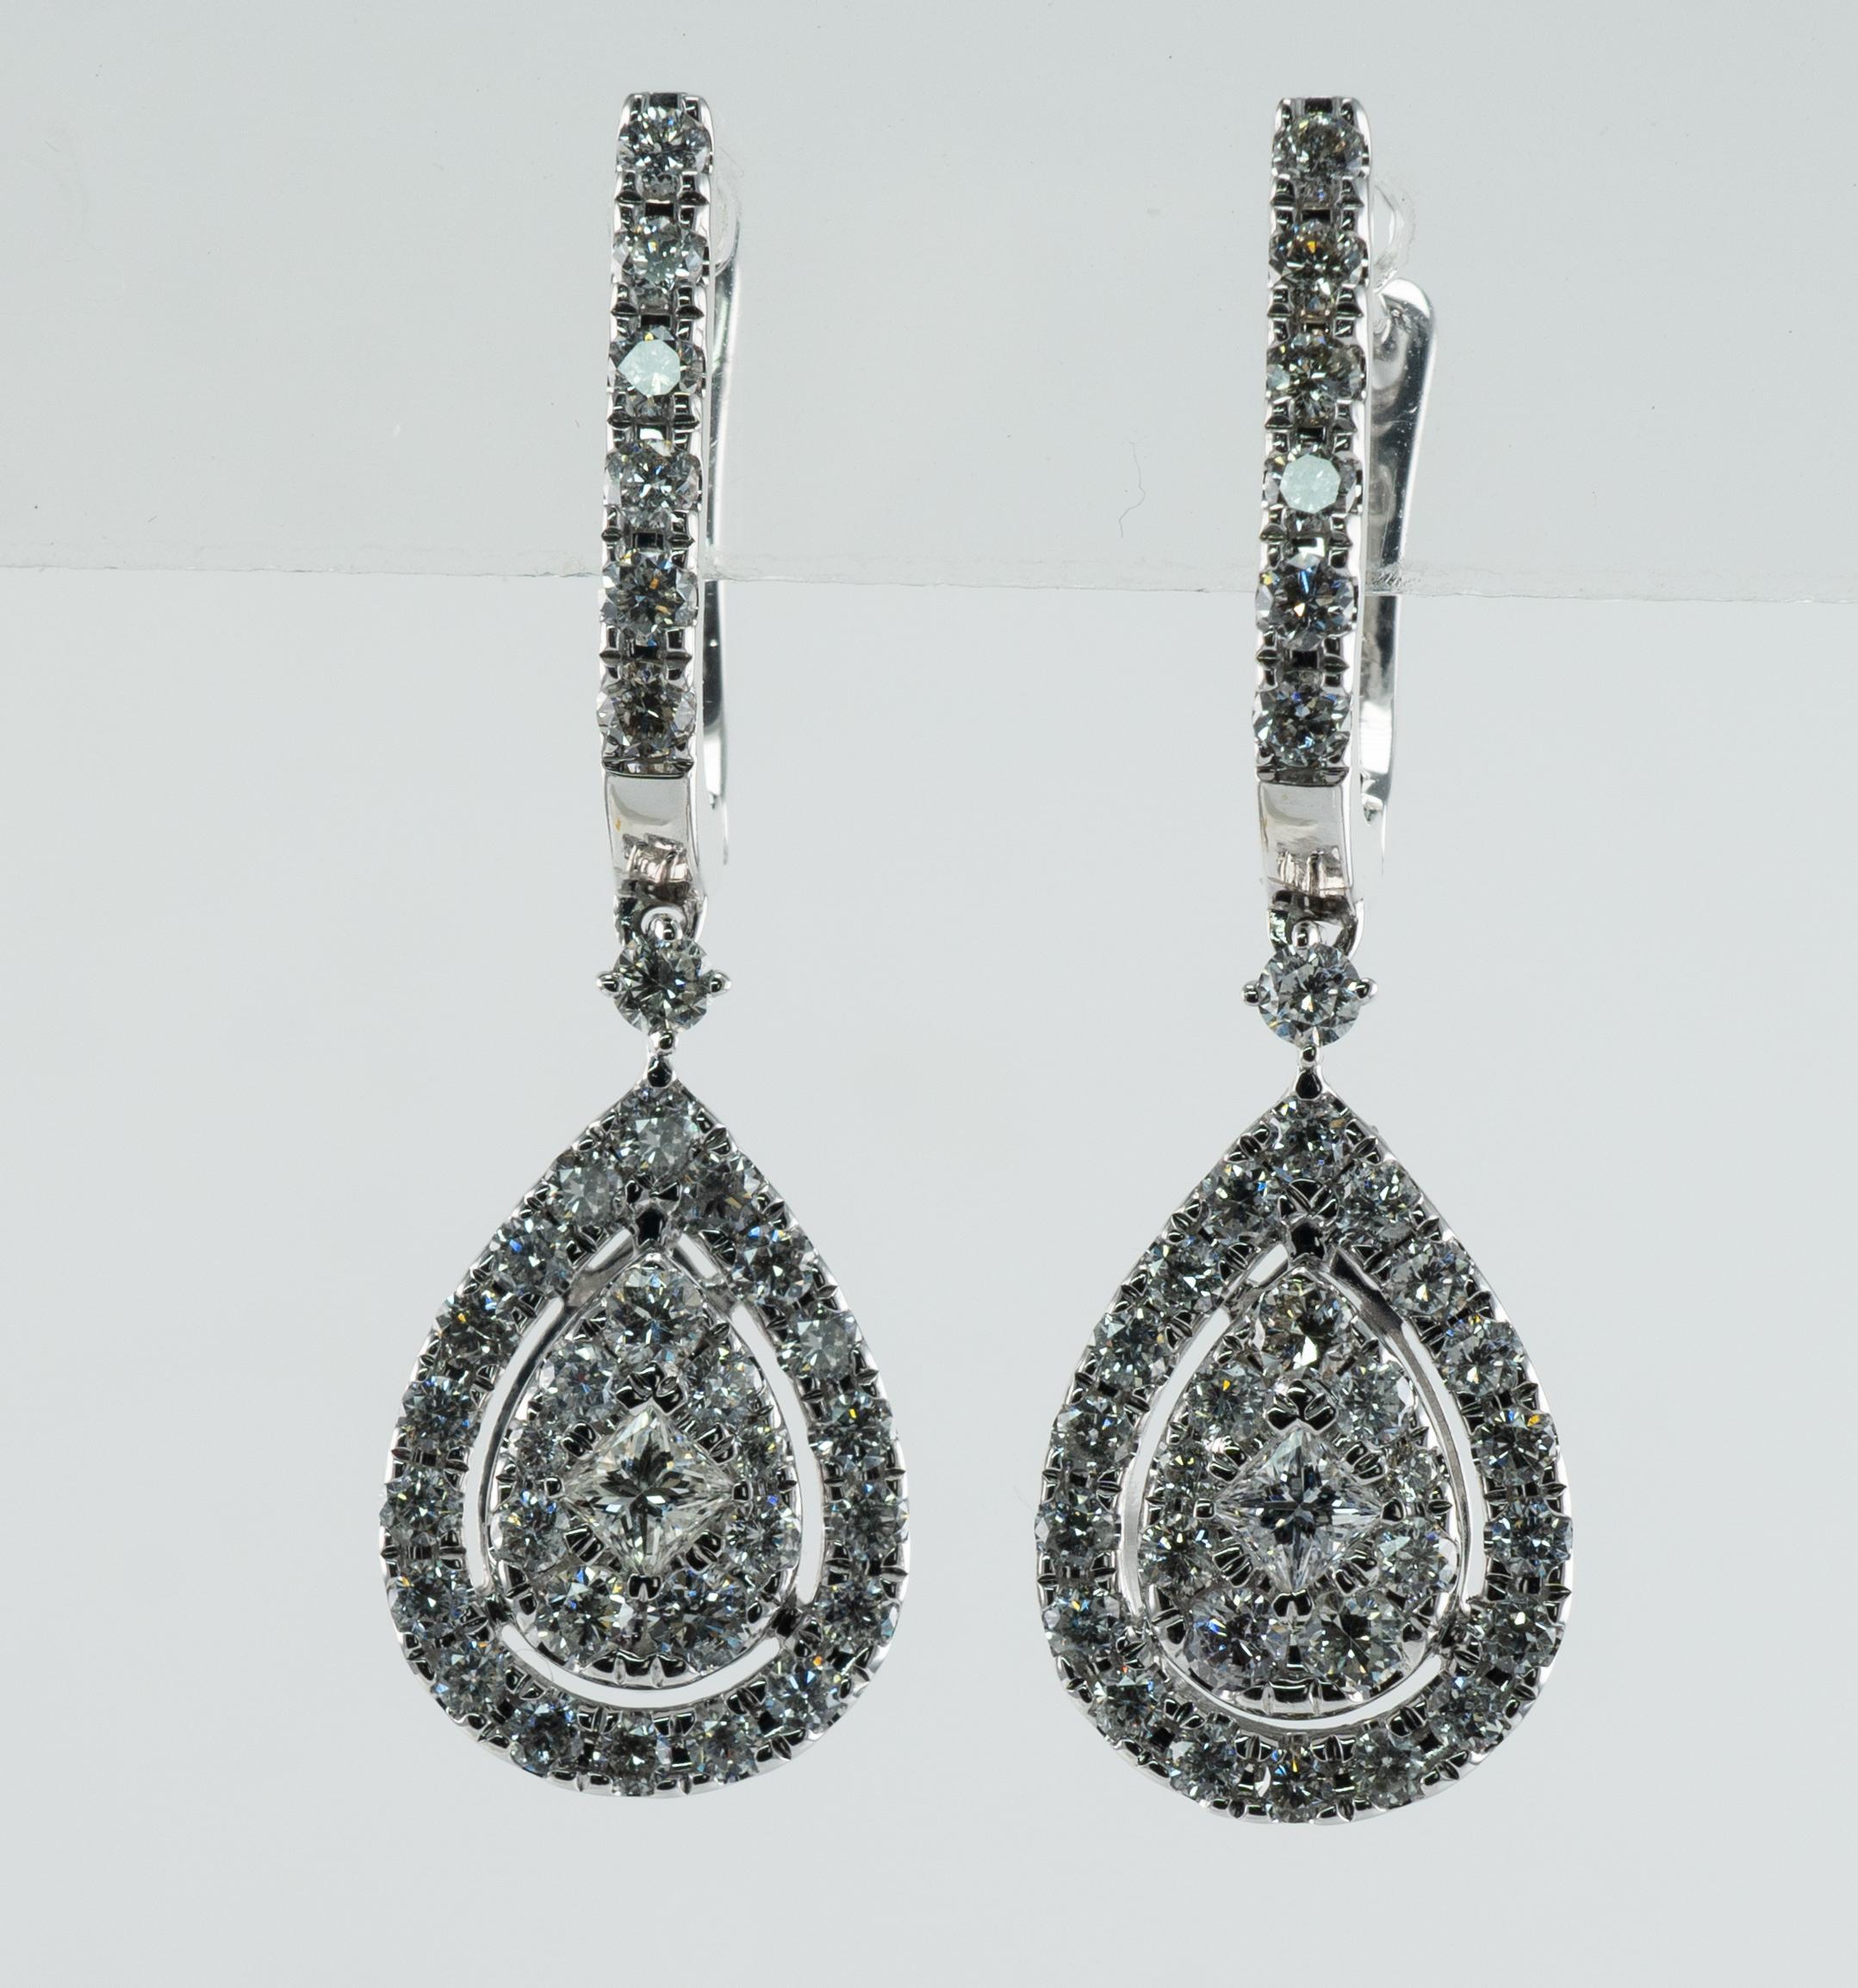 Diamond Earrings 14K White Gold Dangle 1.82 TDW Teardrop Shape

These estate earrings are made in solid 14K White Gold.
The center square diamond is .08 carat.
34 Round brilliant cut in each earring total .83 carat.
The total diamond weight for the